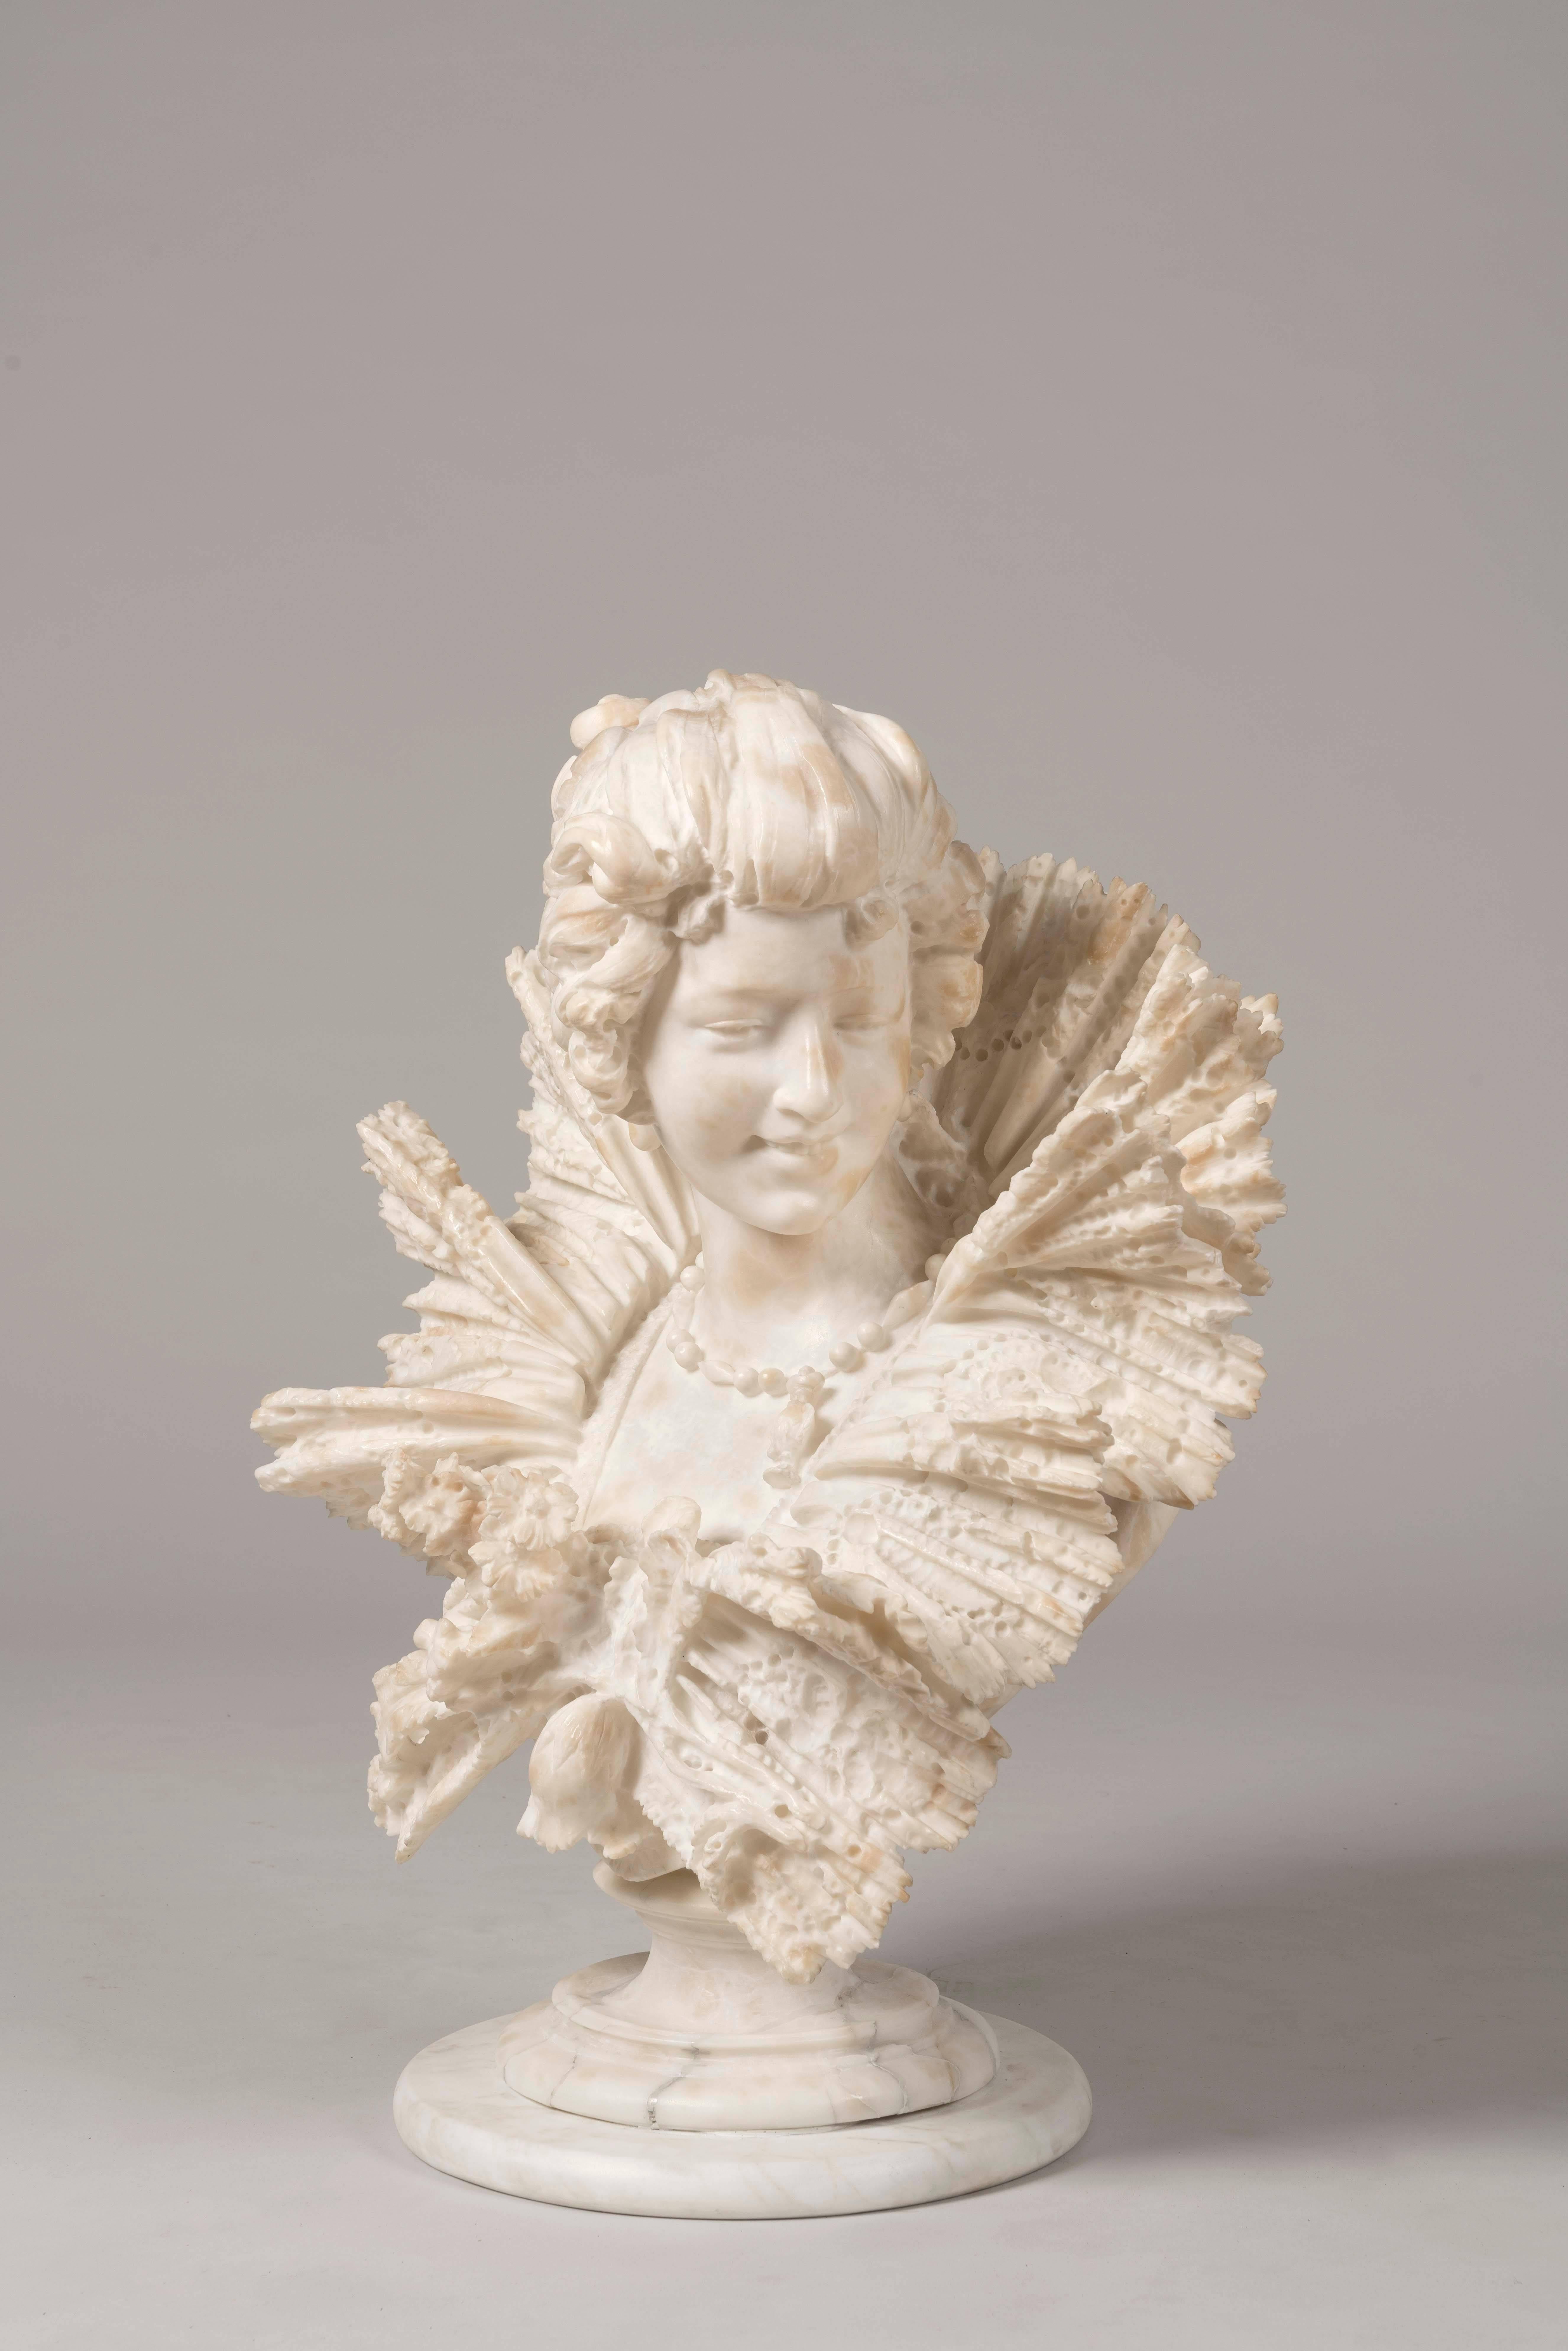 A Belle Époque beauty

A bust of a smiling maiden, carved from alabaster bianco, her coiffured hair in a chignon, wearing a square decollete dress with a pleated lace ruff showing a necklace sits on a circular lipped socle, set up a faux marble